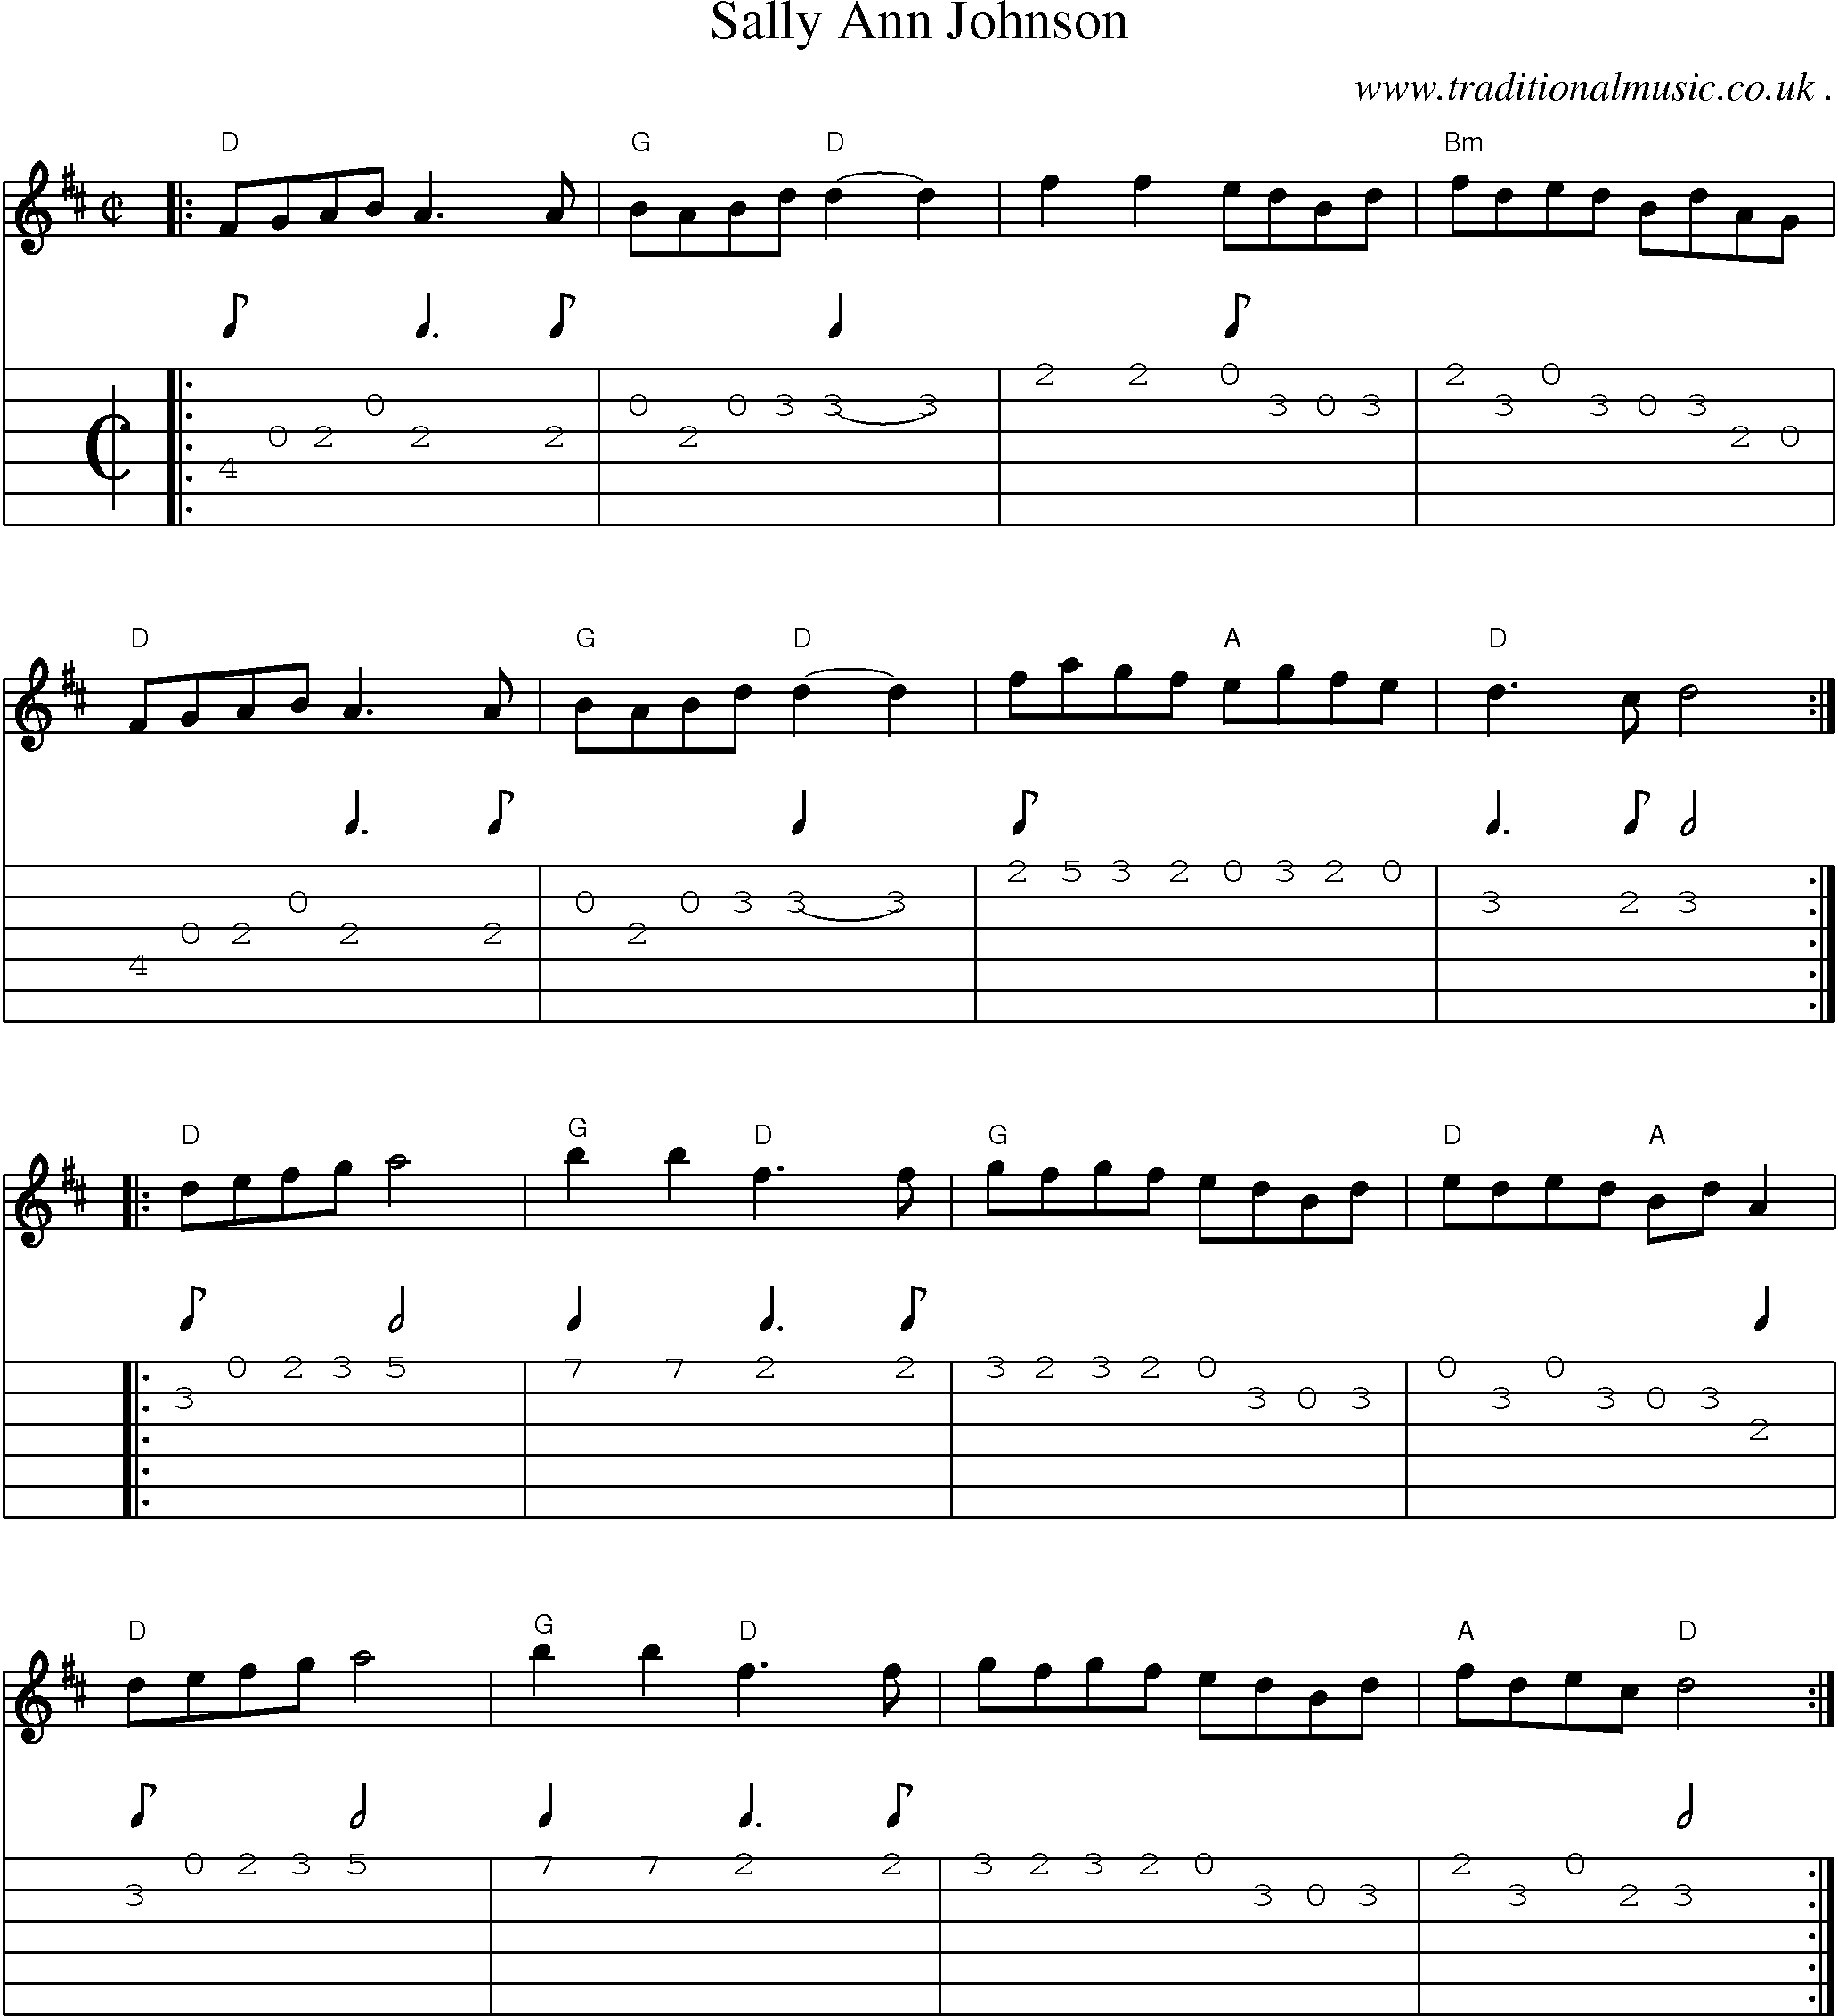 Music Score and Guitar Tabs for Sally Ann Johnson